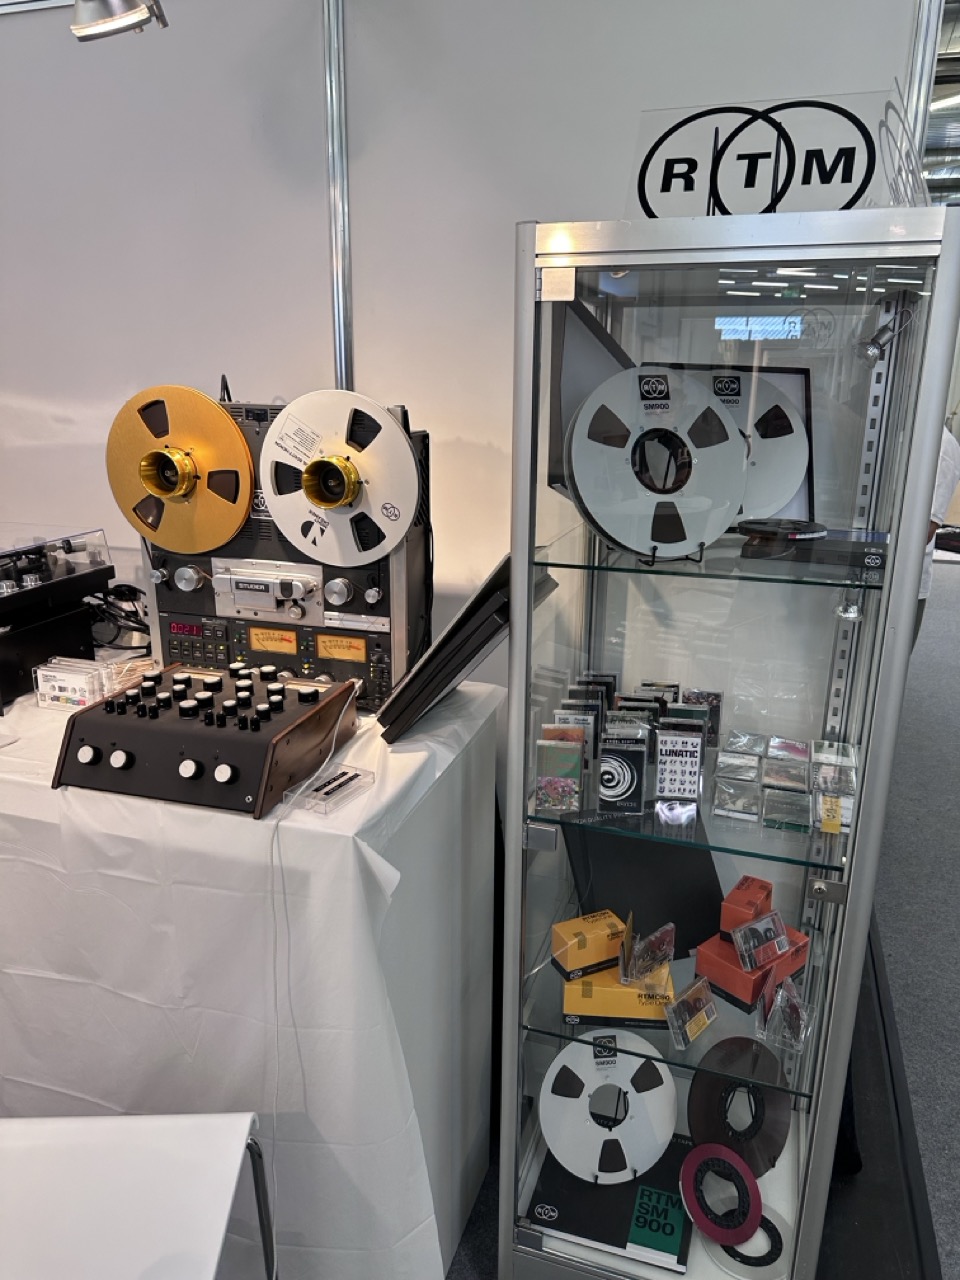 RTM who specialise in audio tape and accessories had a stall. Great to see the old tech still alive and well.